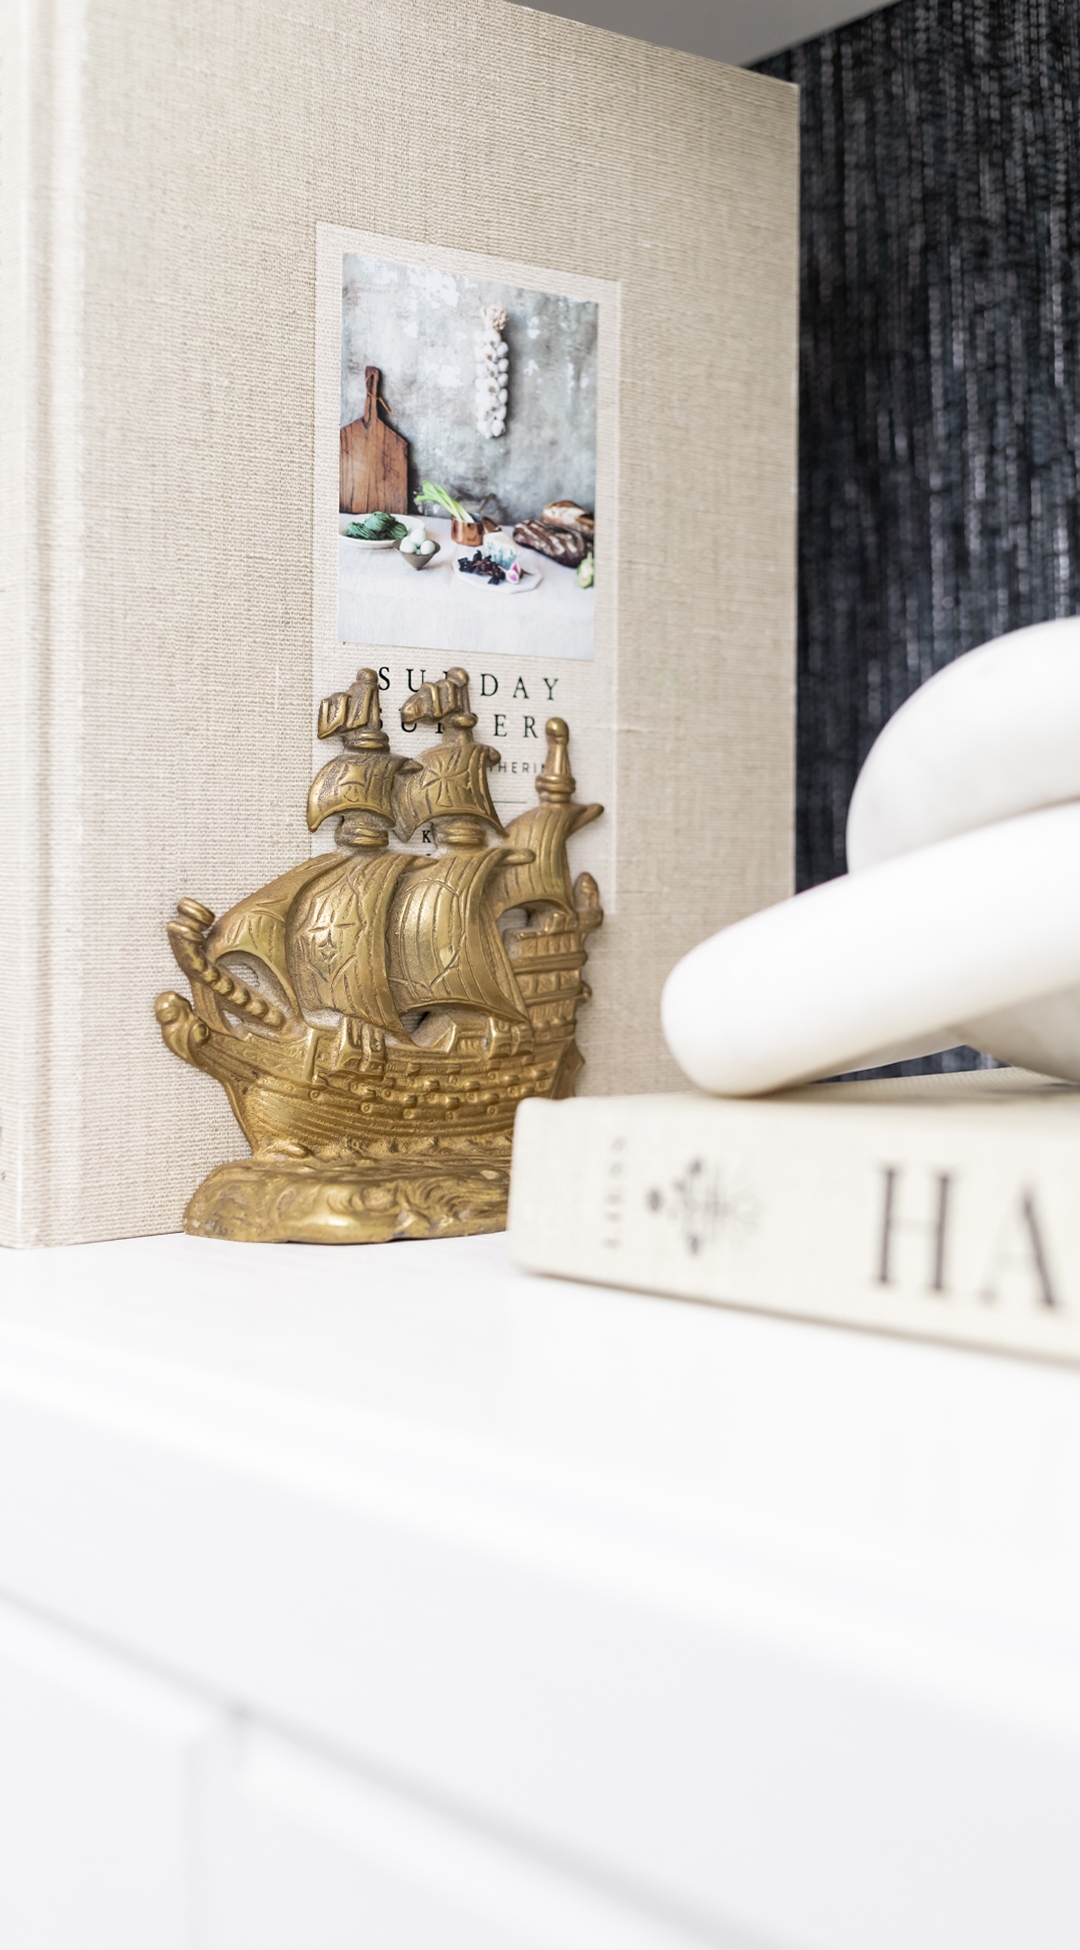 Brass ship bookends displayed with cookbooks.